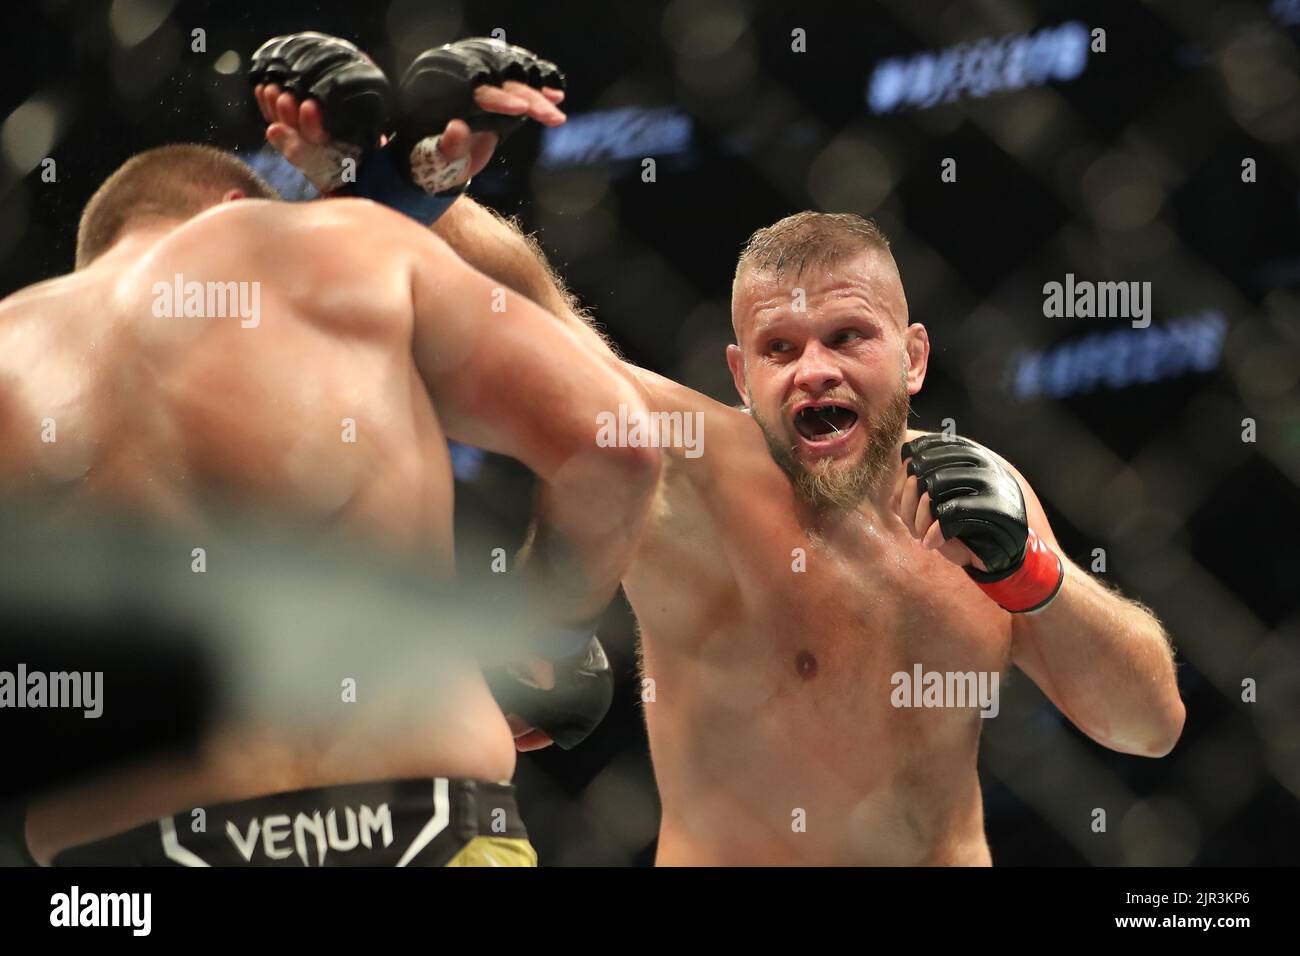 SALT LAKE CITY, UT - AUGUST 20: Marcin Tybura and Alexandr Romanov meet in the octagon for their Heavyweight bout at UFC 278 at the Vivint Arena on August 20, 2022 in Salt Lake City, Utah, United States. (Photo by Alejandro Salazar/PxImages) Stock Photo